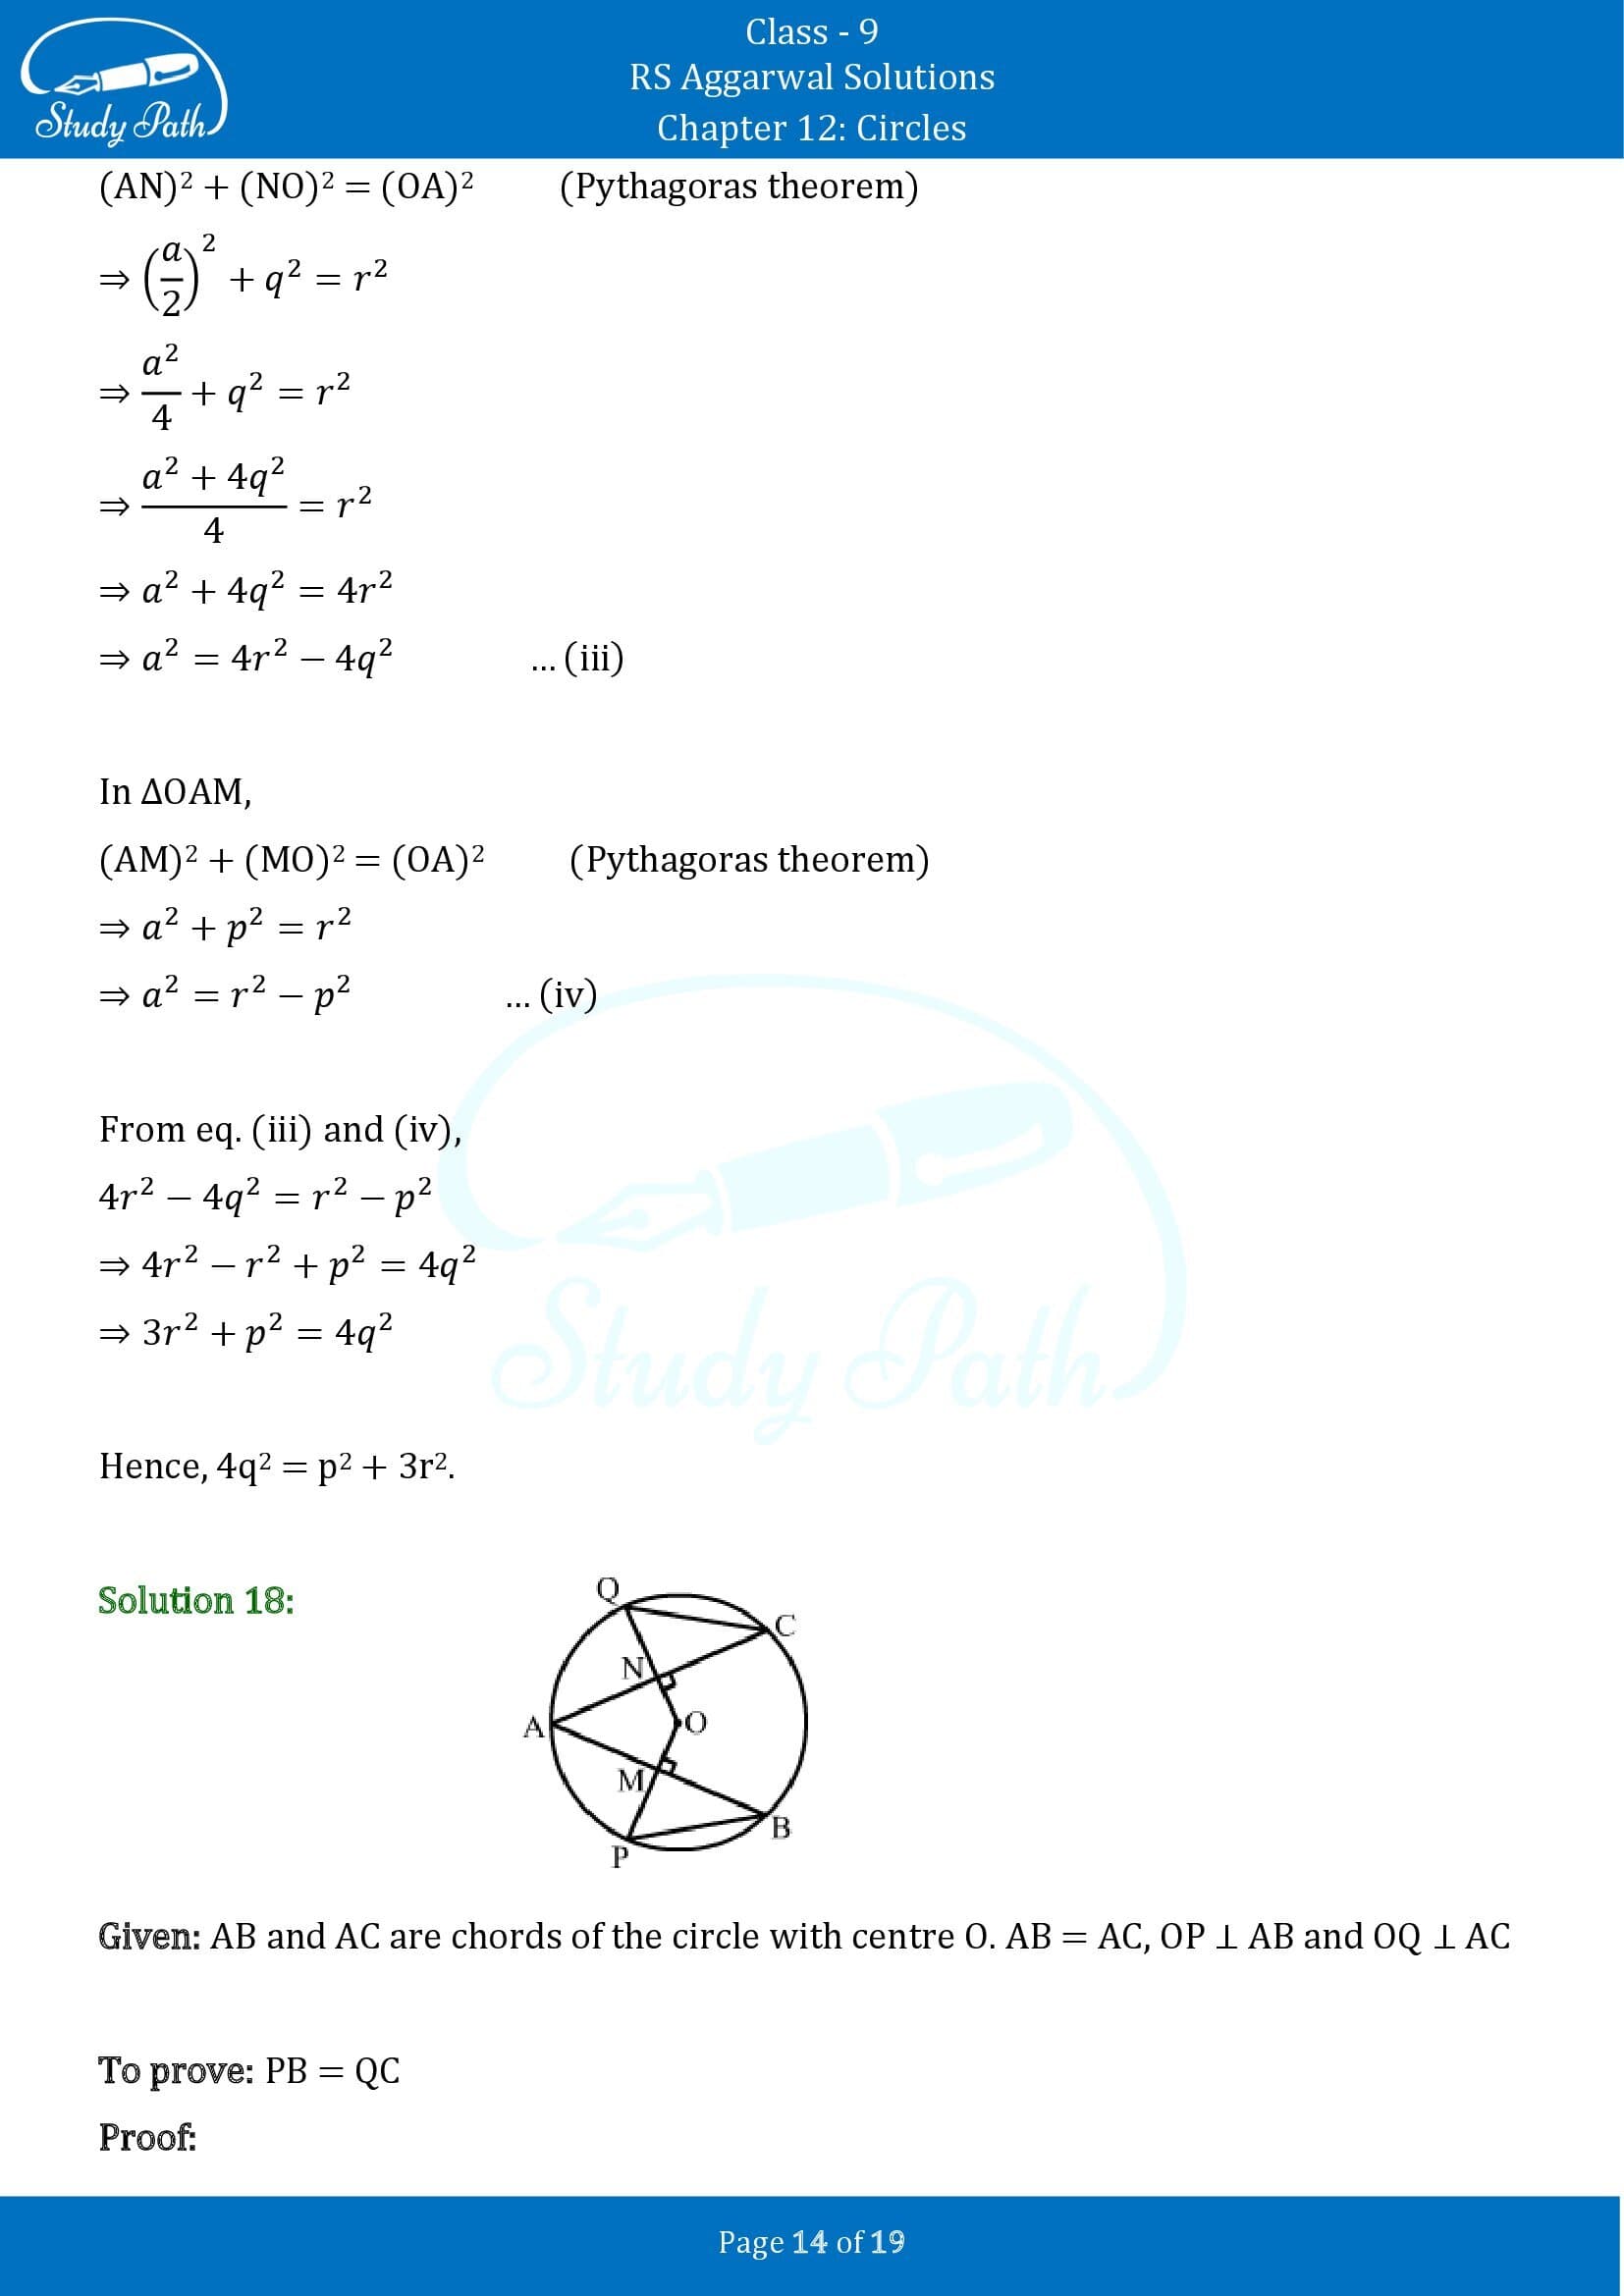 RS Aggarwal Solutions Class 9 Chapter 12 Circles Exercise 12A 00014